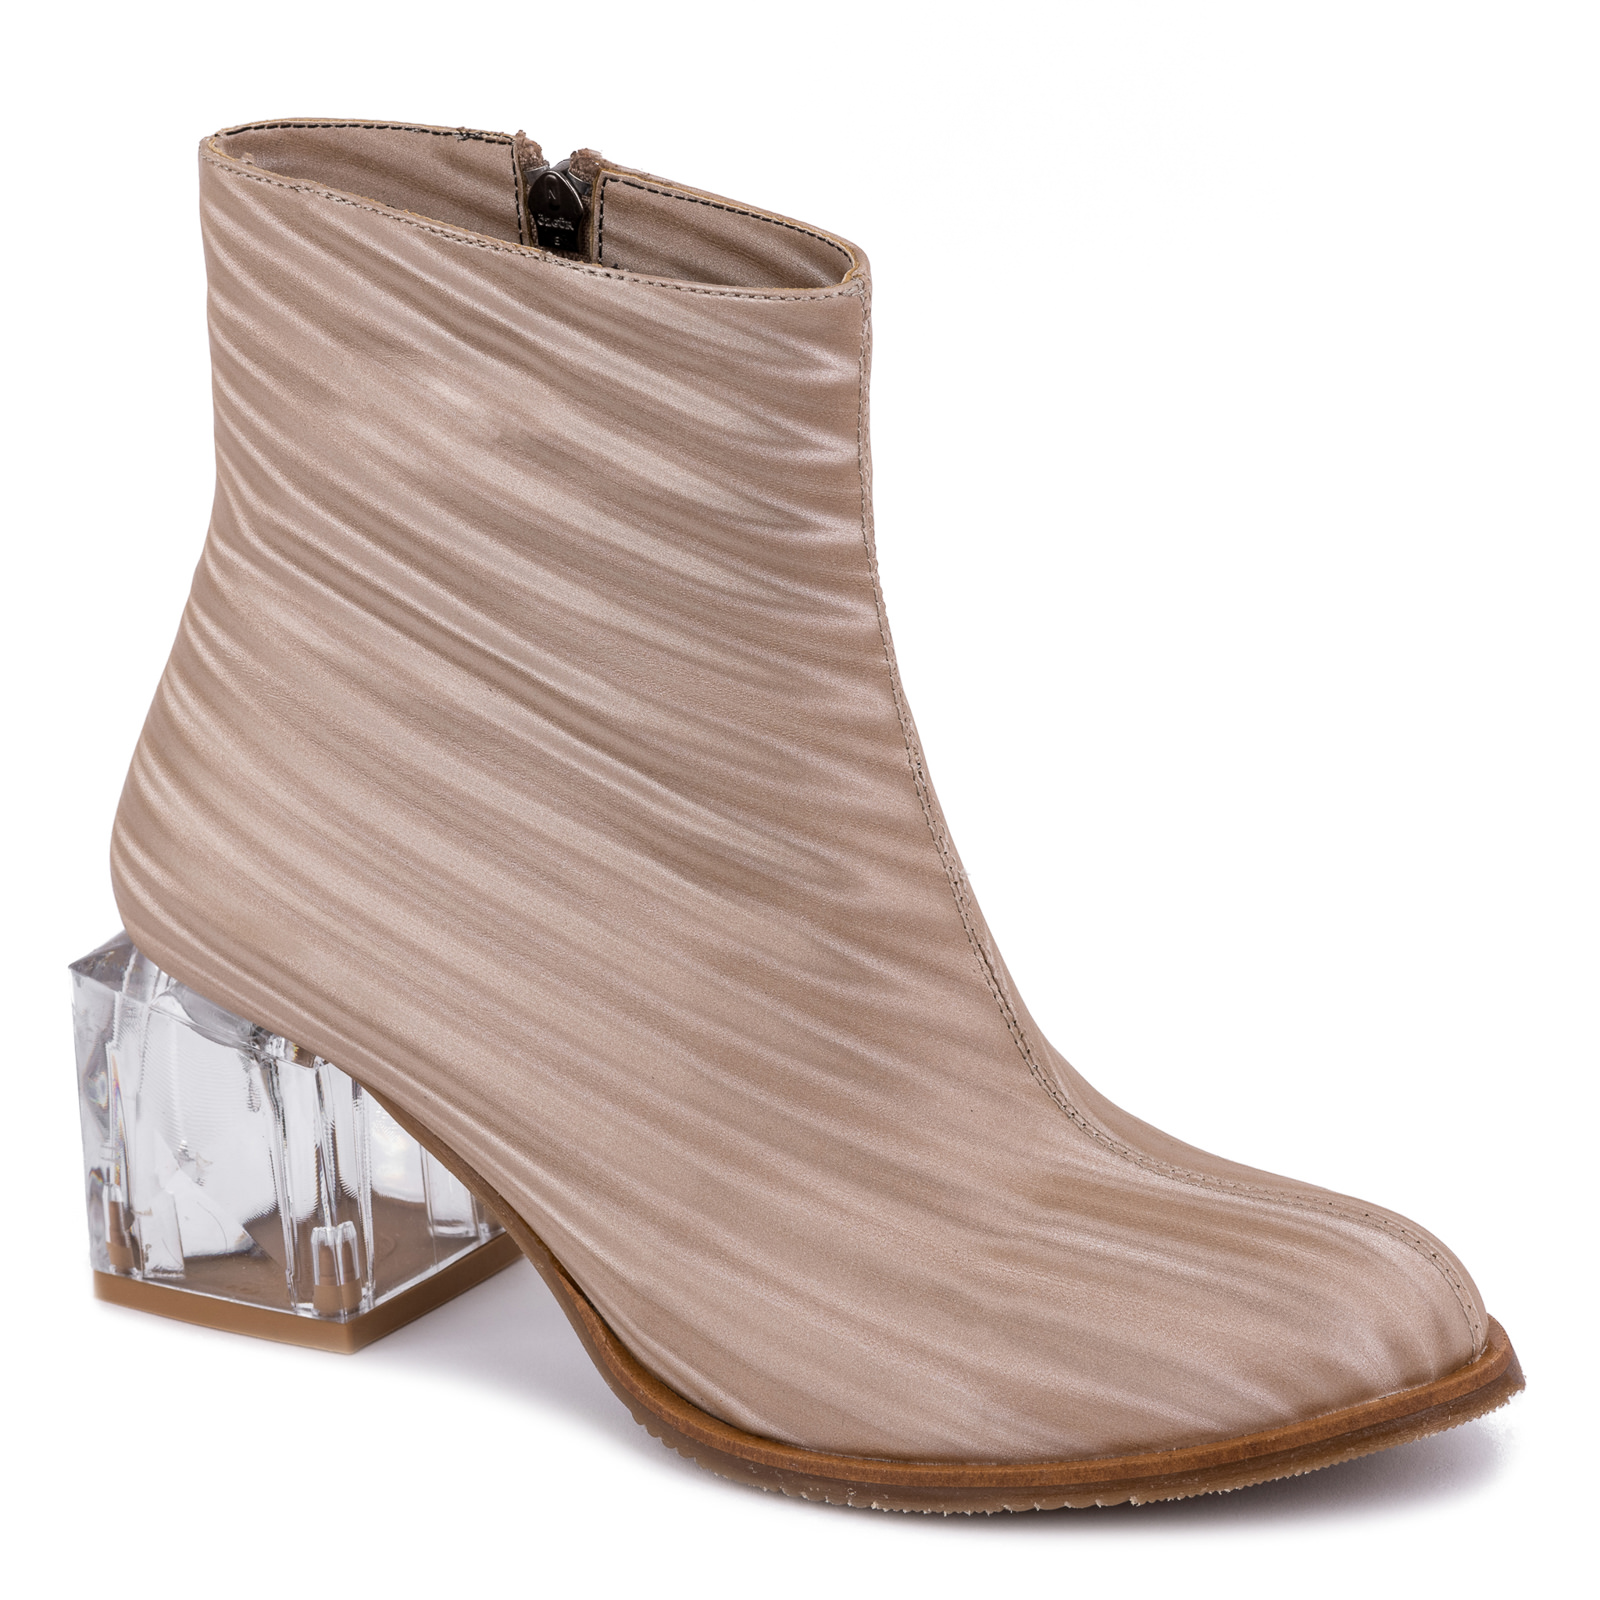 ANKLE BOOTS WITH CLEAR BLOCK HEEL - BEIGE